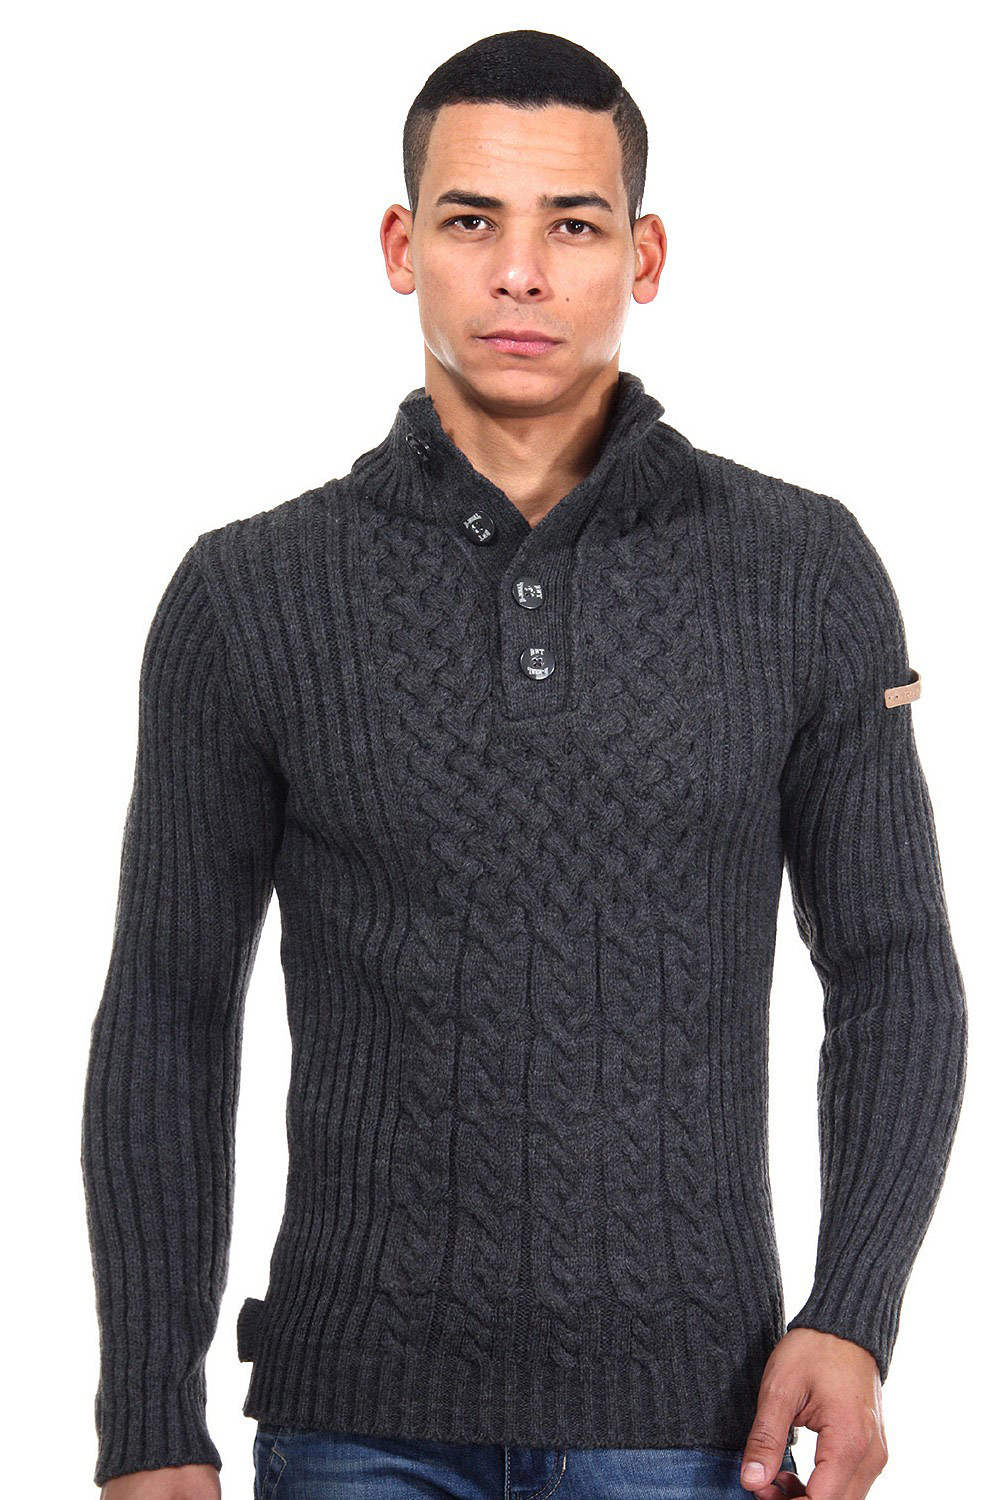 R-NEAL jumper stand-up collar slim fit at oboy.com